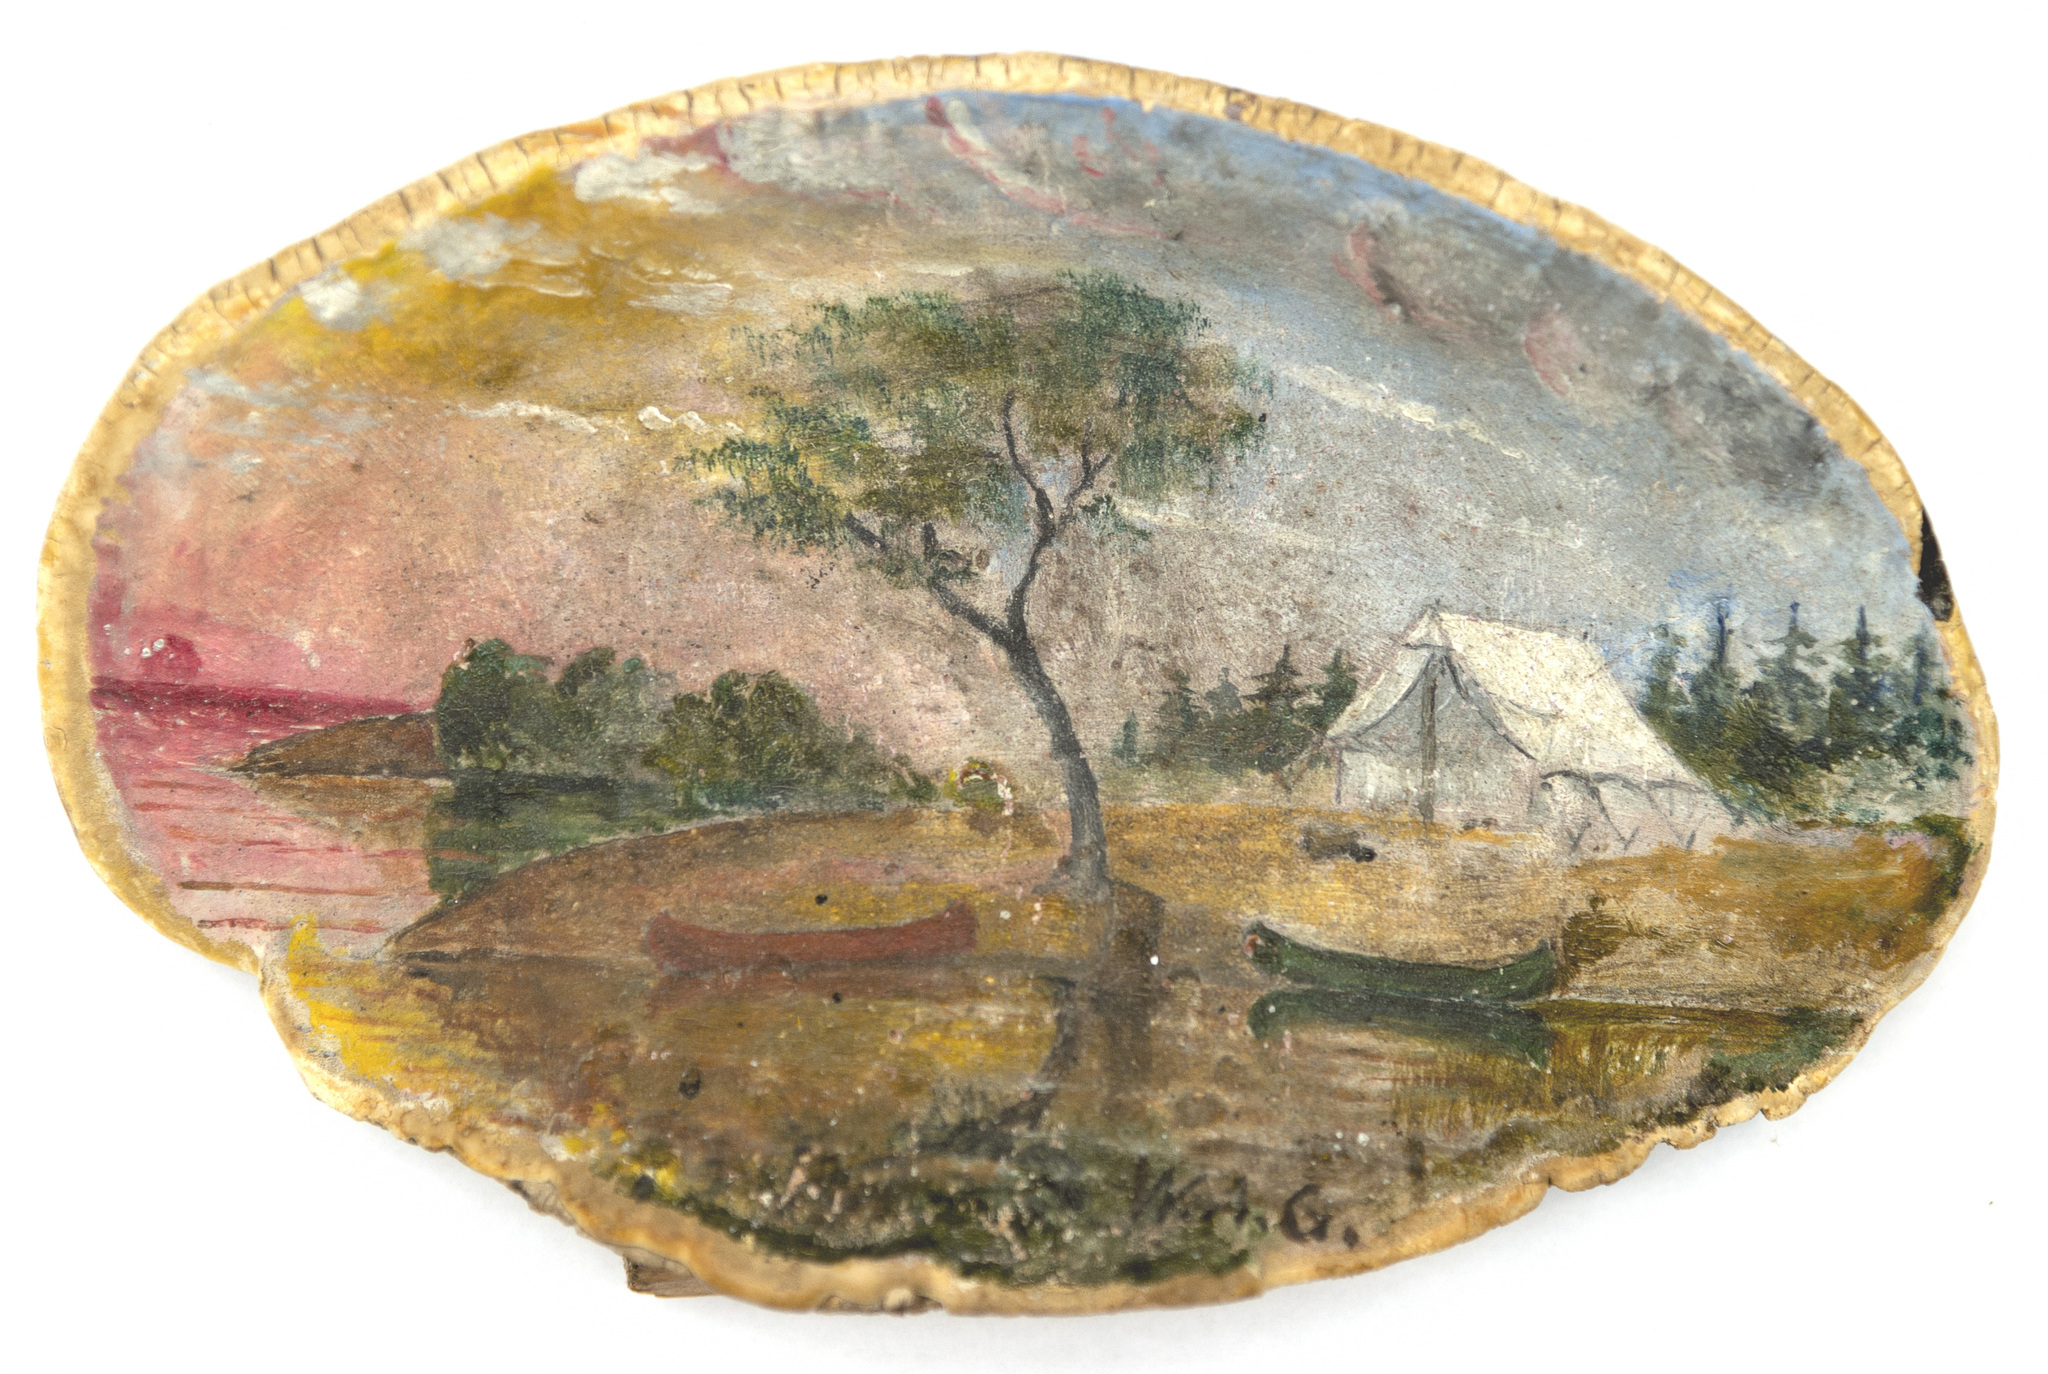 Oil painting on fungus of canoe and campsite